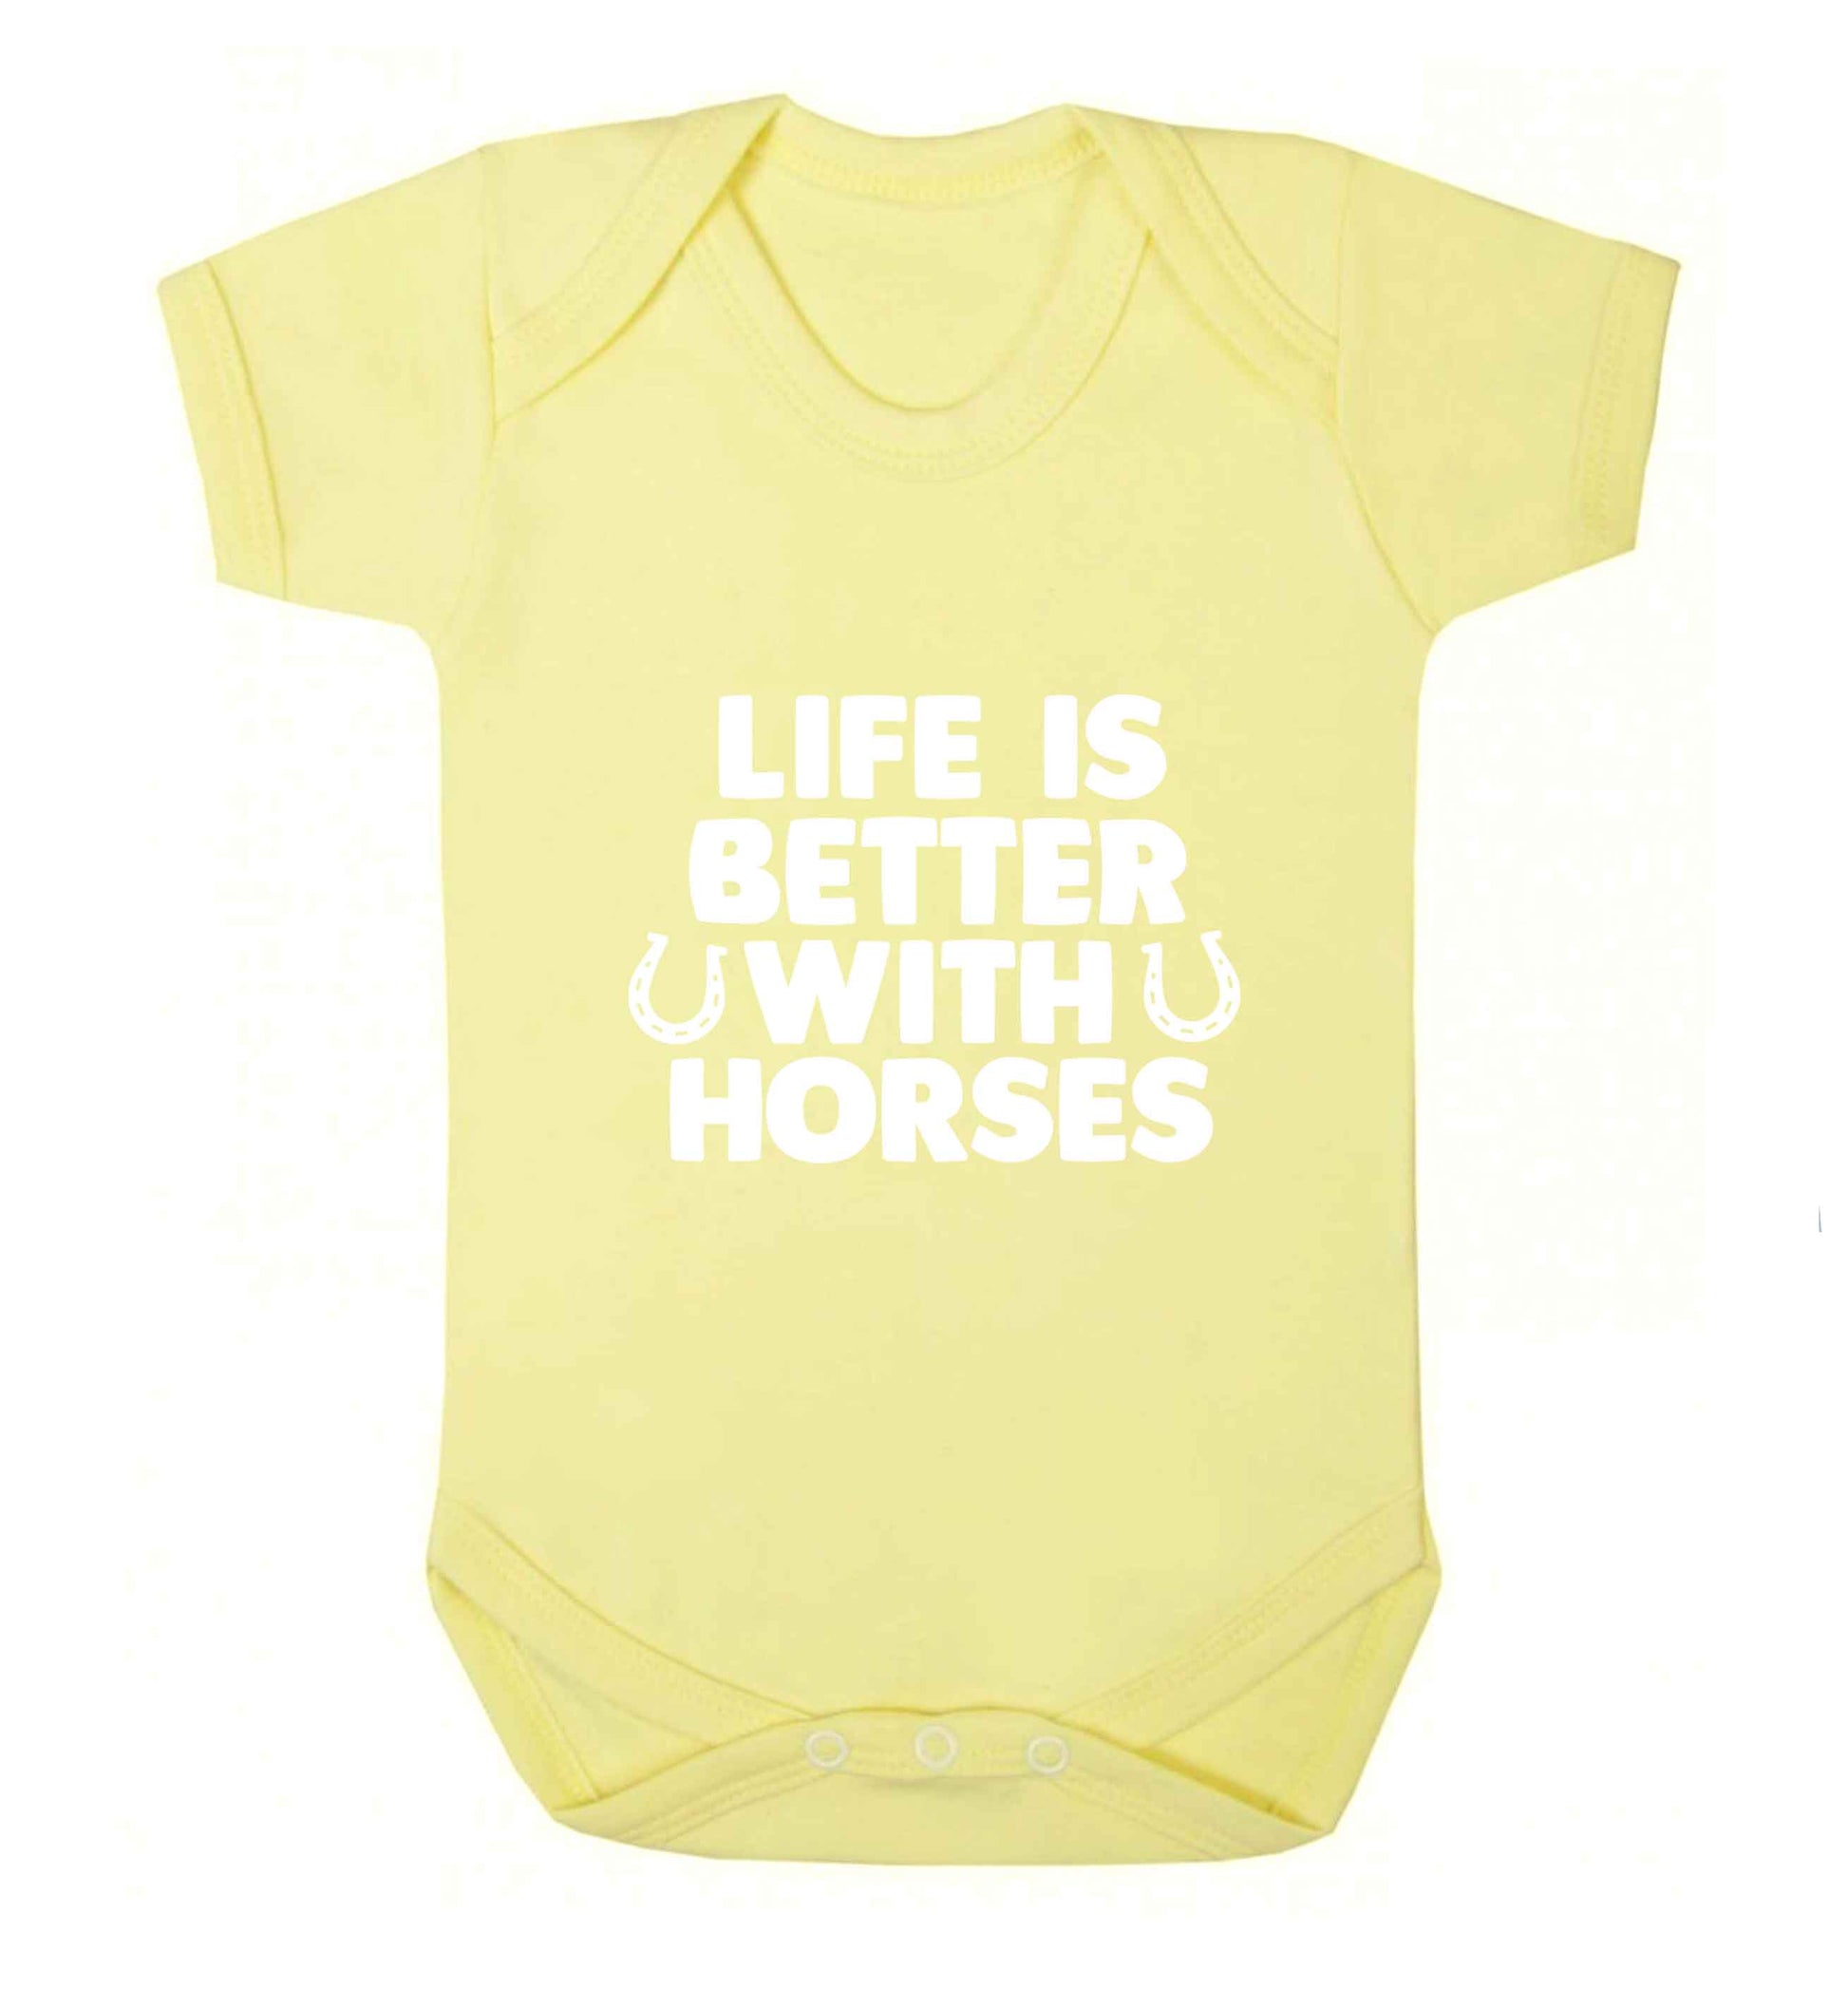 Life is better with horses baby vest pale yellow 18-24 months